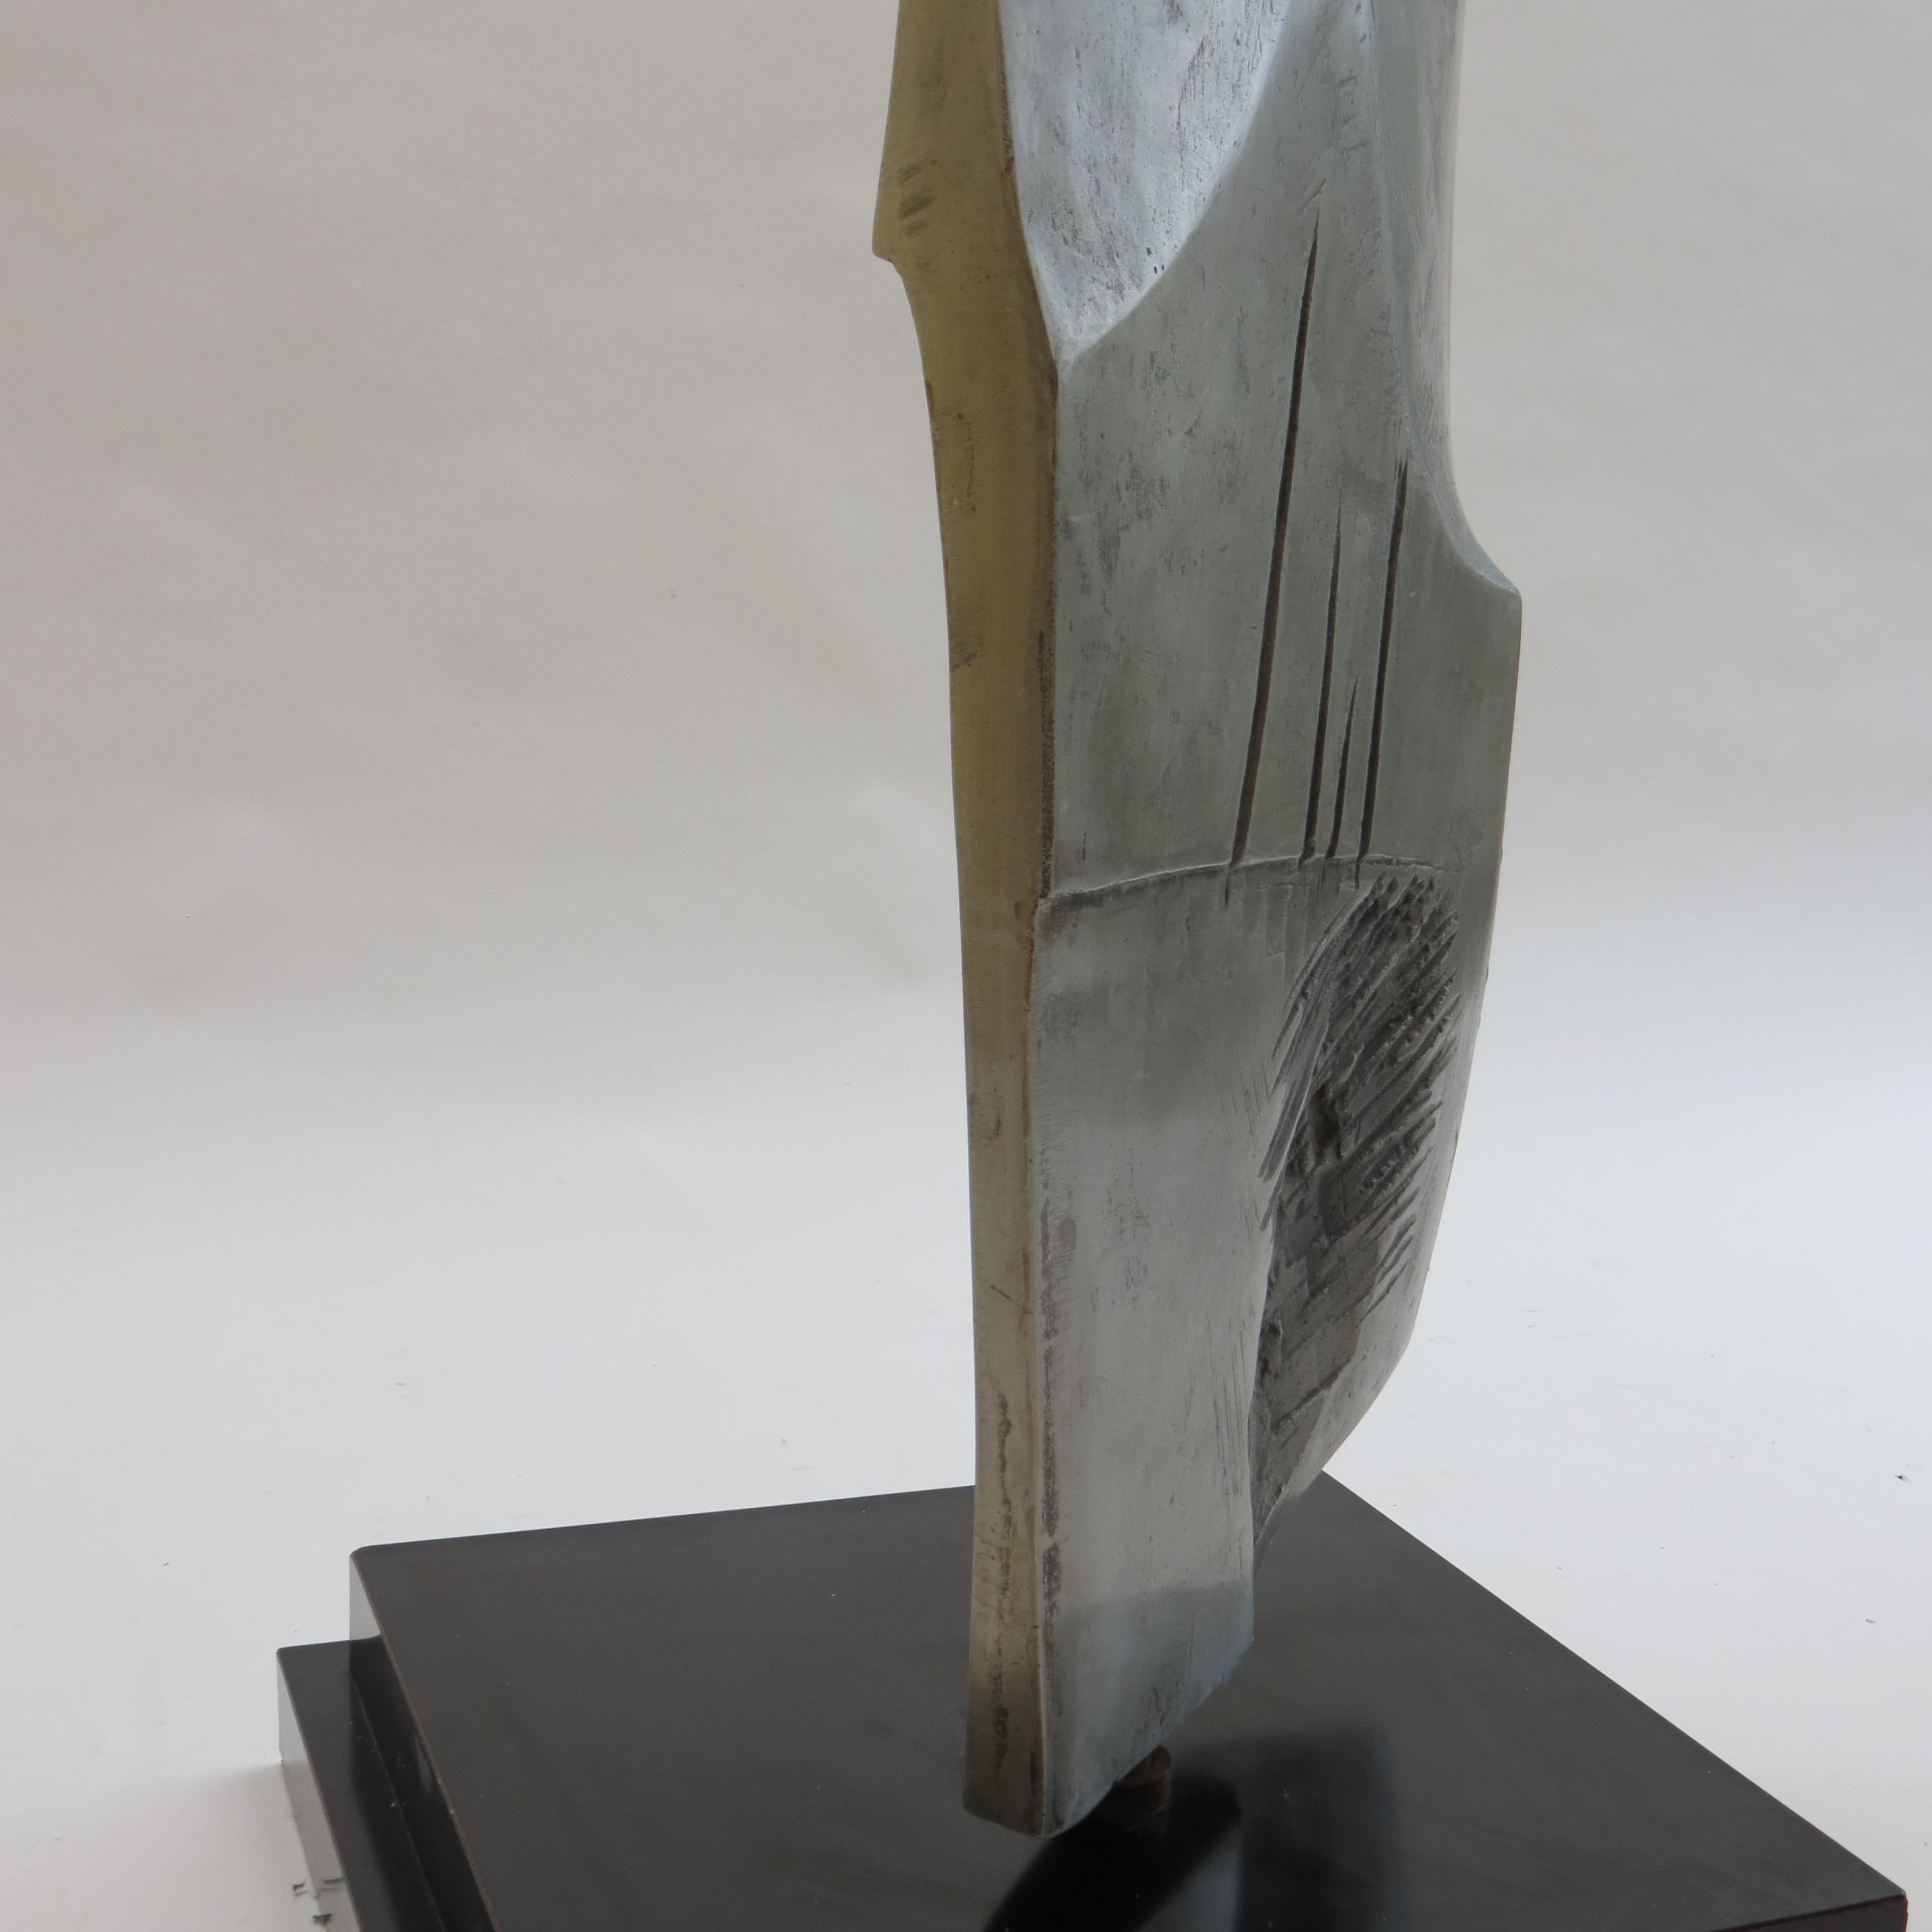 Hand-Crafted Large Vintage Floor Standing Abstract Aluminium Sculpture, Alastair Michie, 1970